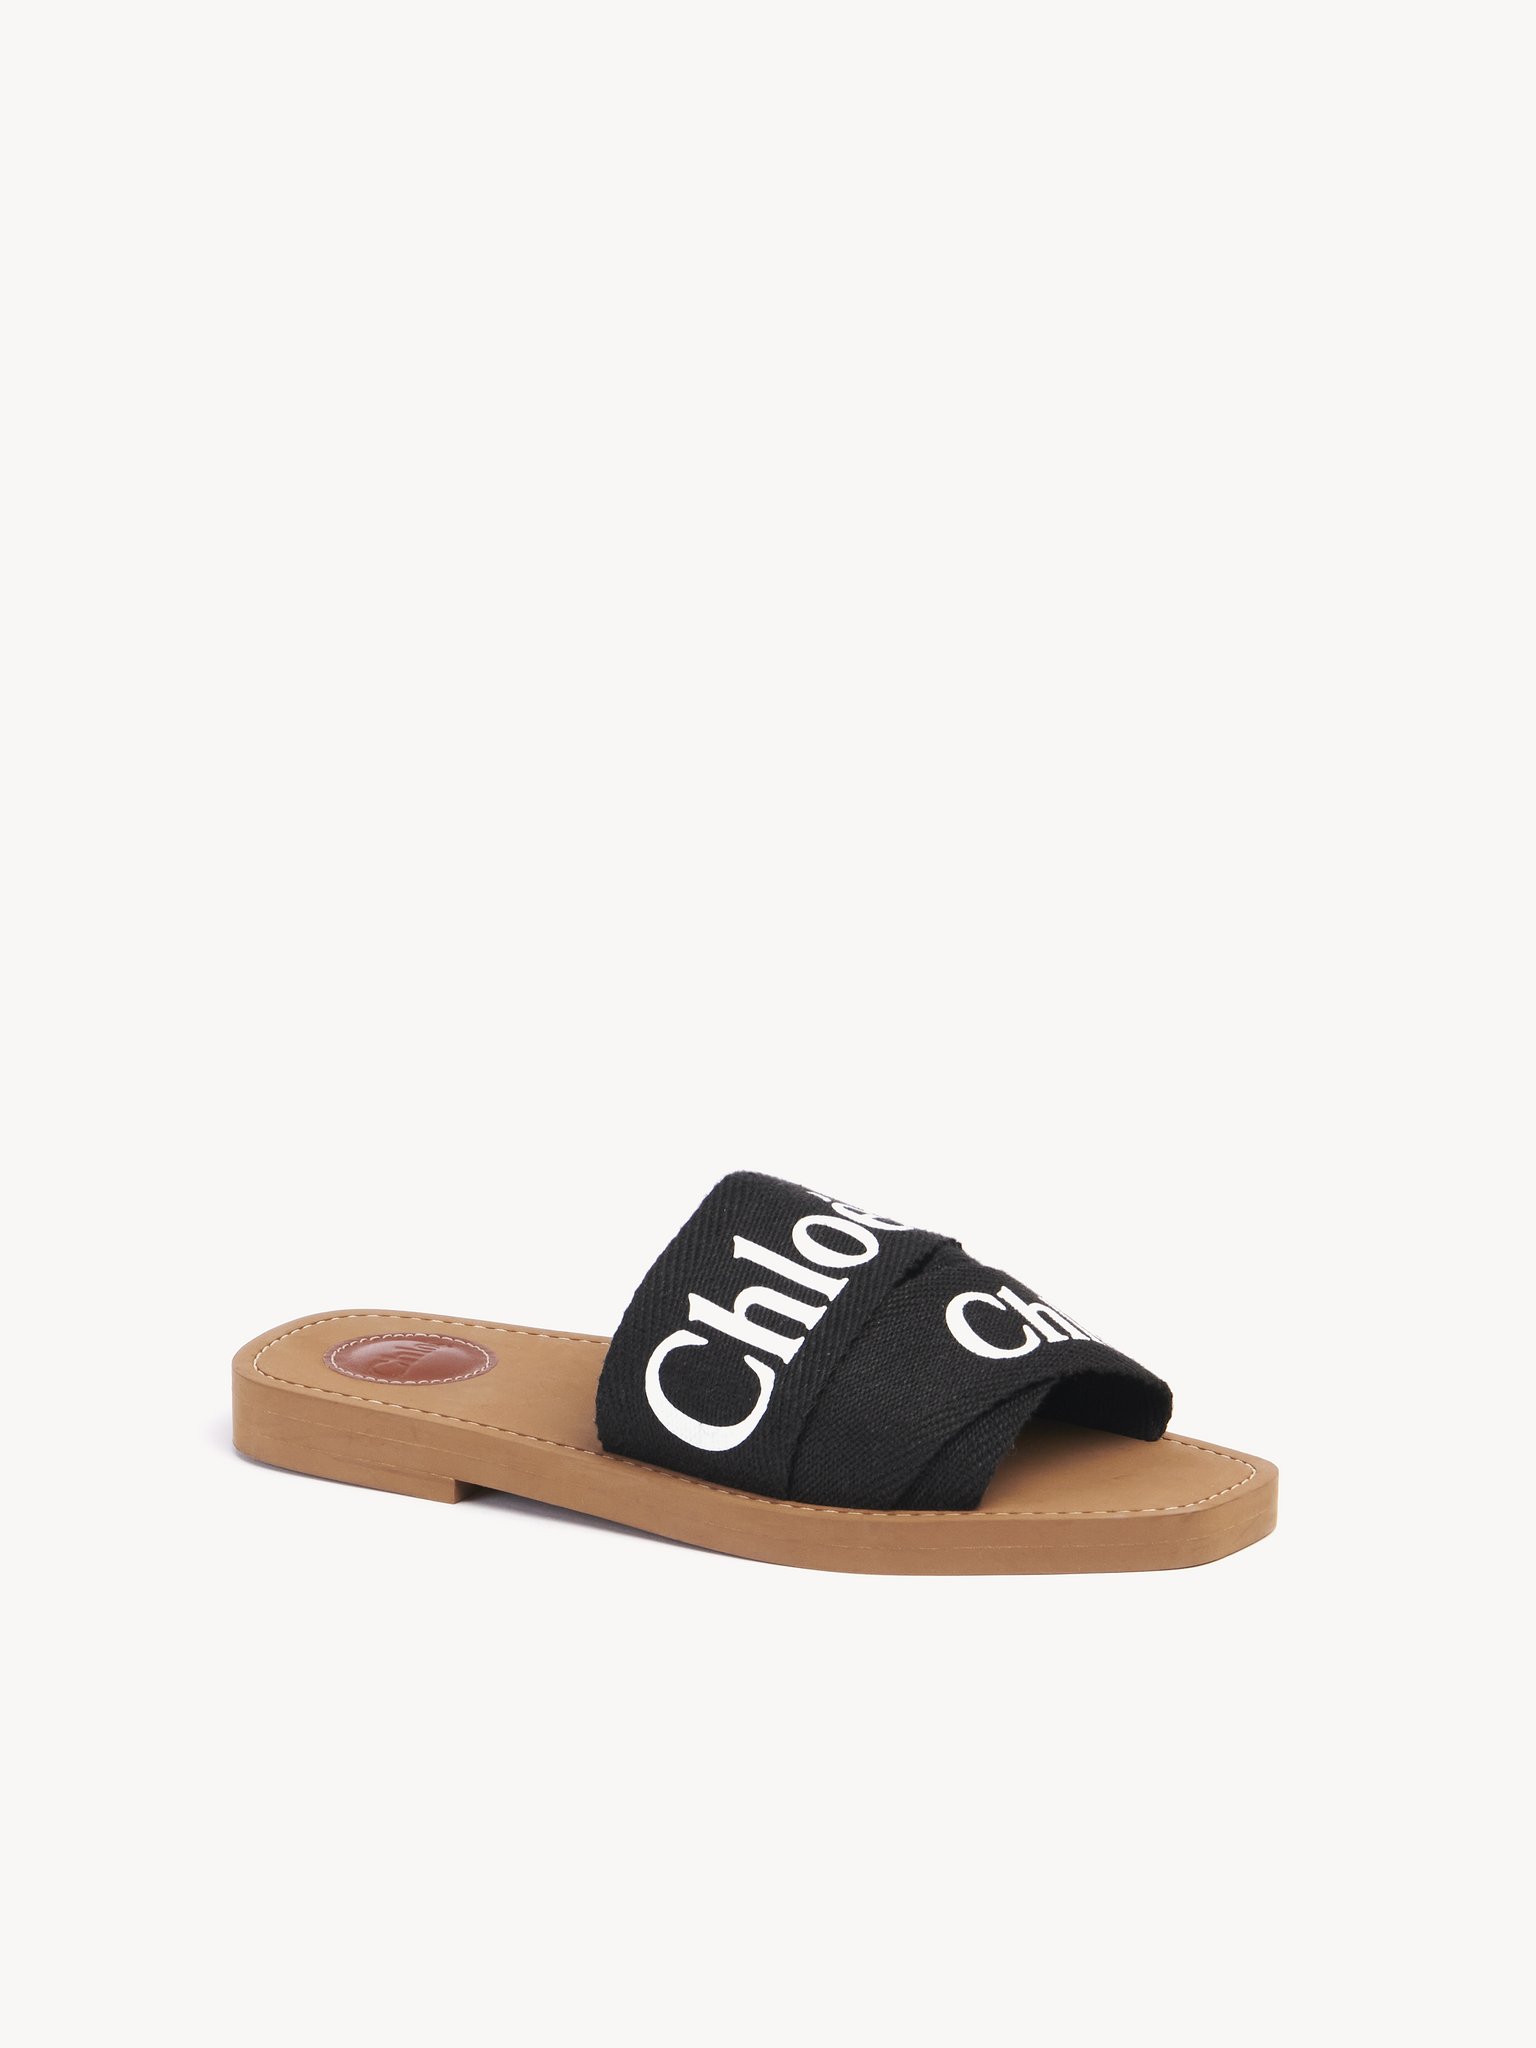 Chloe Sandals: The It Sandals Every Fashion Person Is Loving | Who What ...